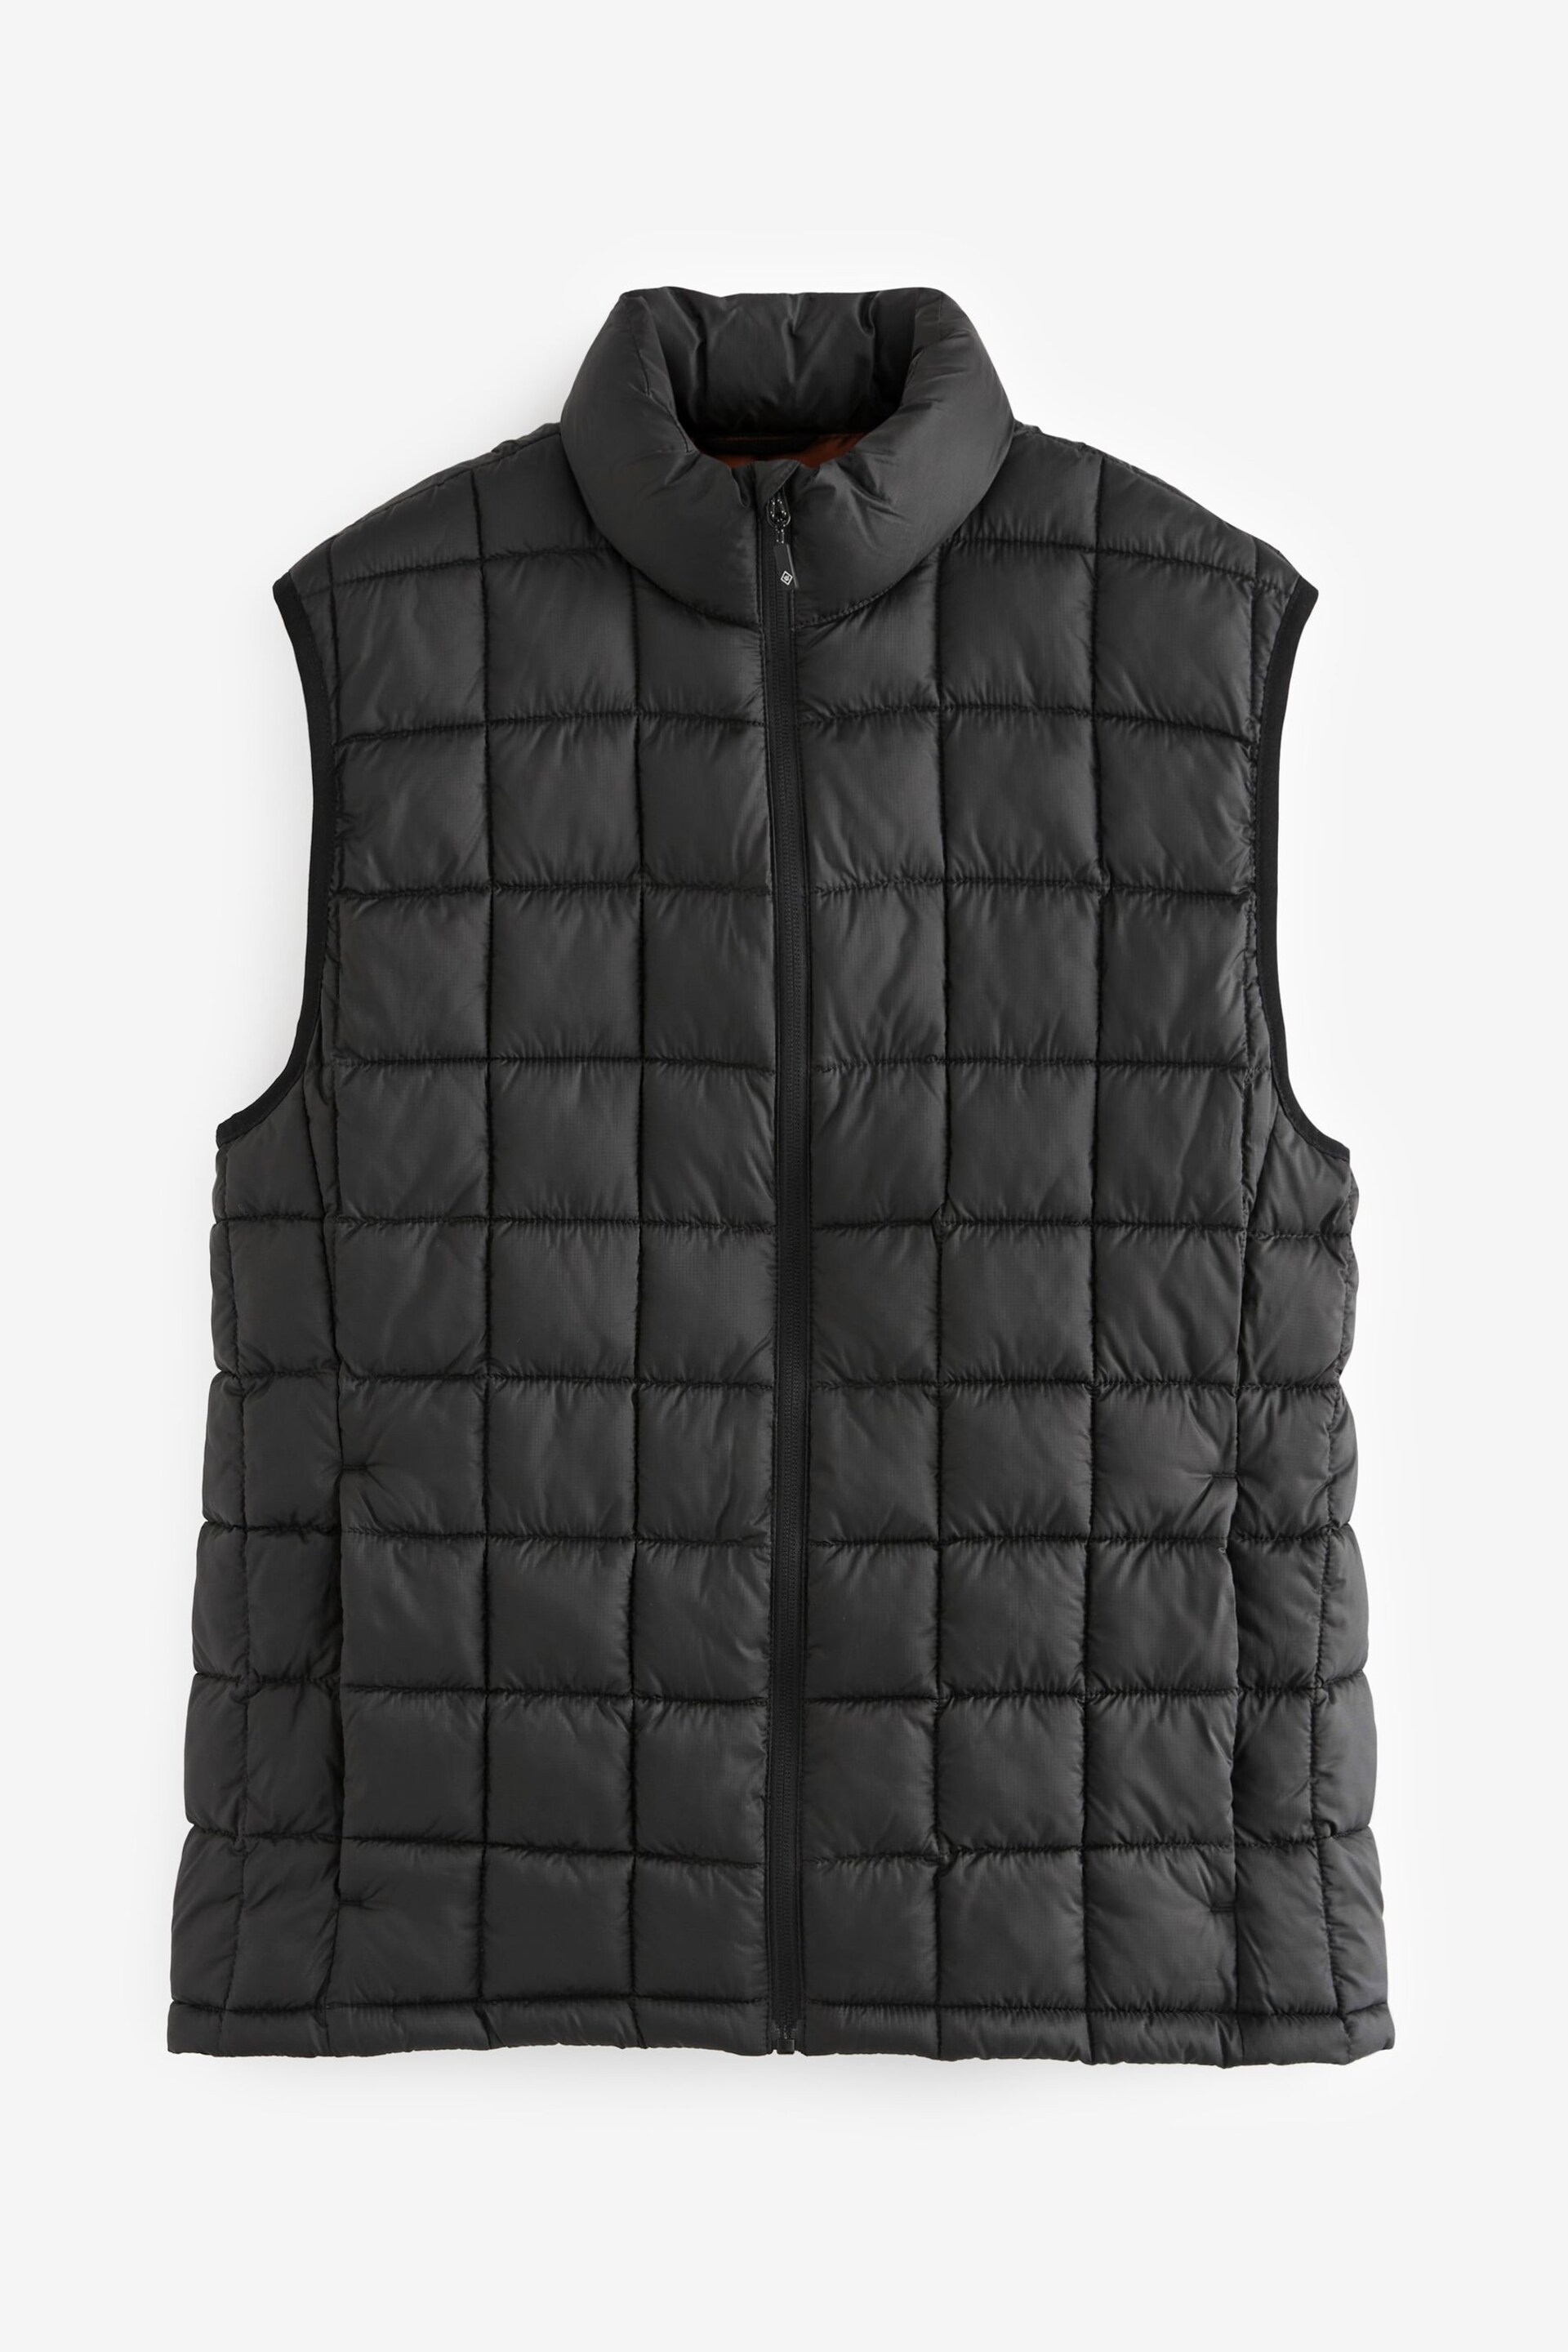 Black Lightweight Square Quilted Shower Resistant Gilet - Image 8 of 9